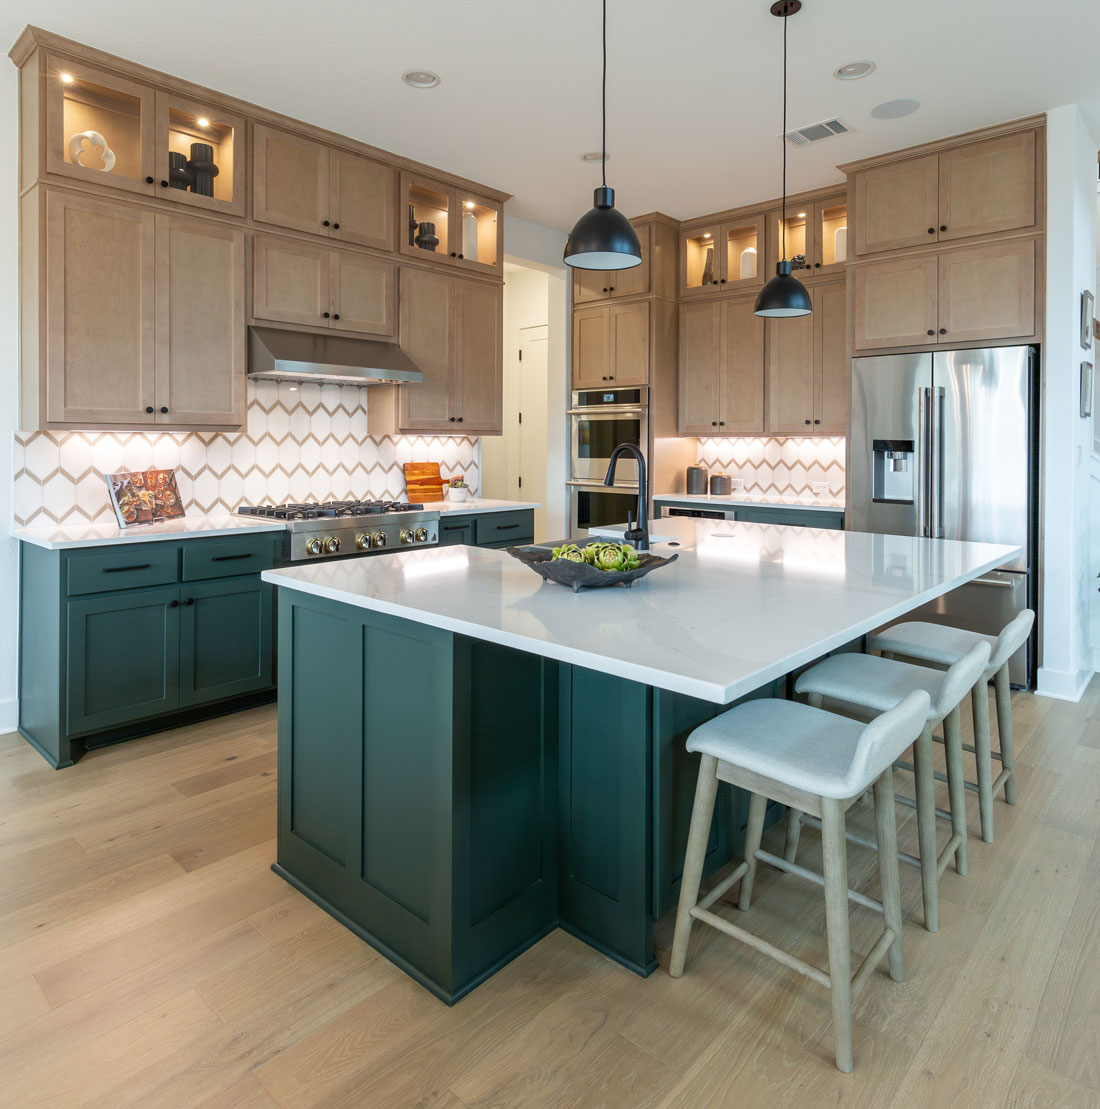 Kitchen cabinets with maple uppers and green painted base cabinets and island with OE4, IE2, flat panel Shaker style cabinet doors and glass uppers